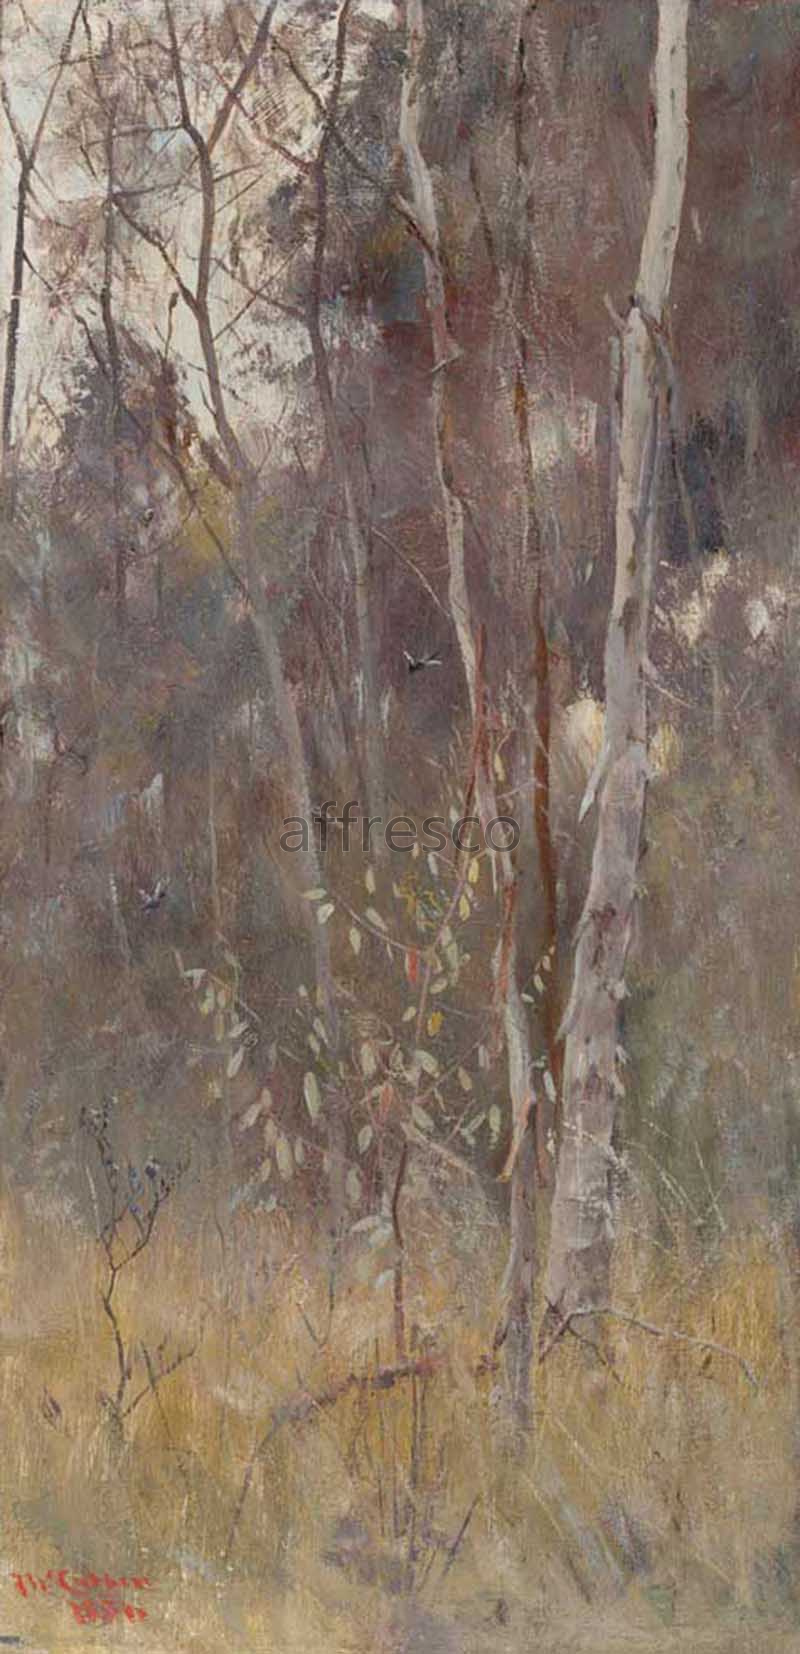 Classic landscapes | Frederick McCubbin At the falling of the year | Affresco Factory